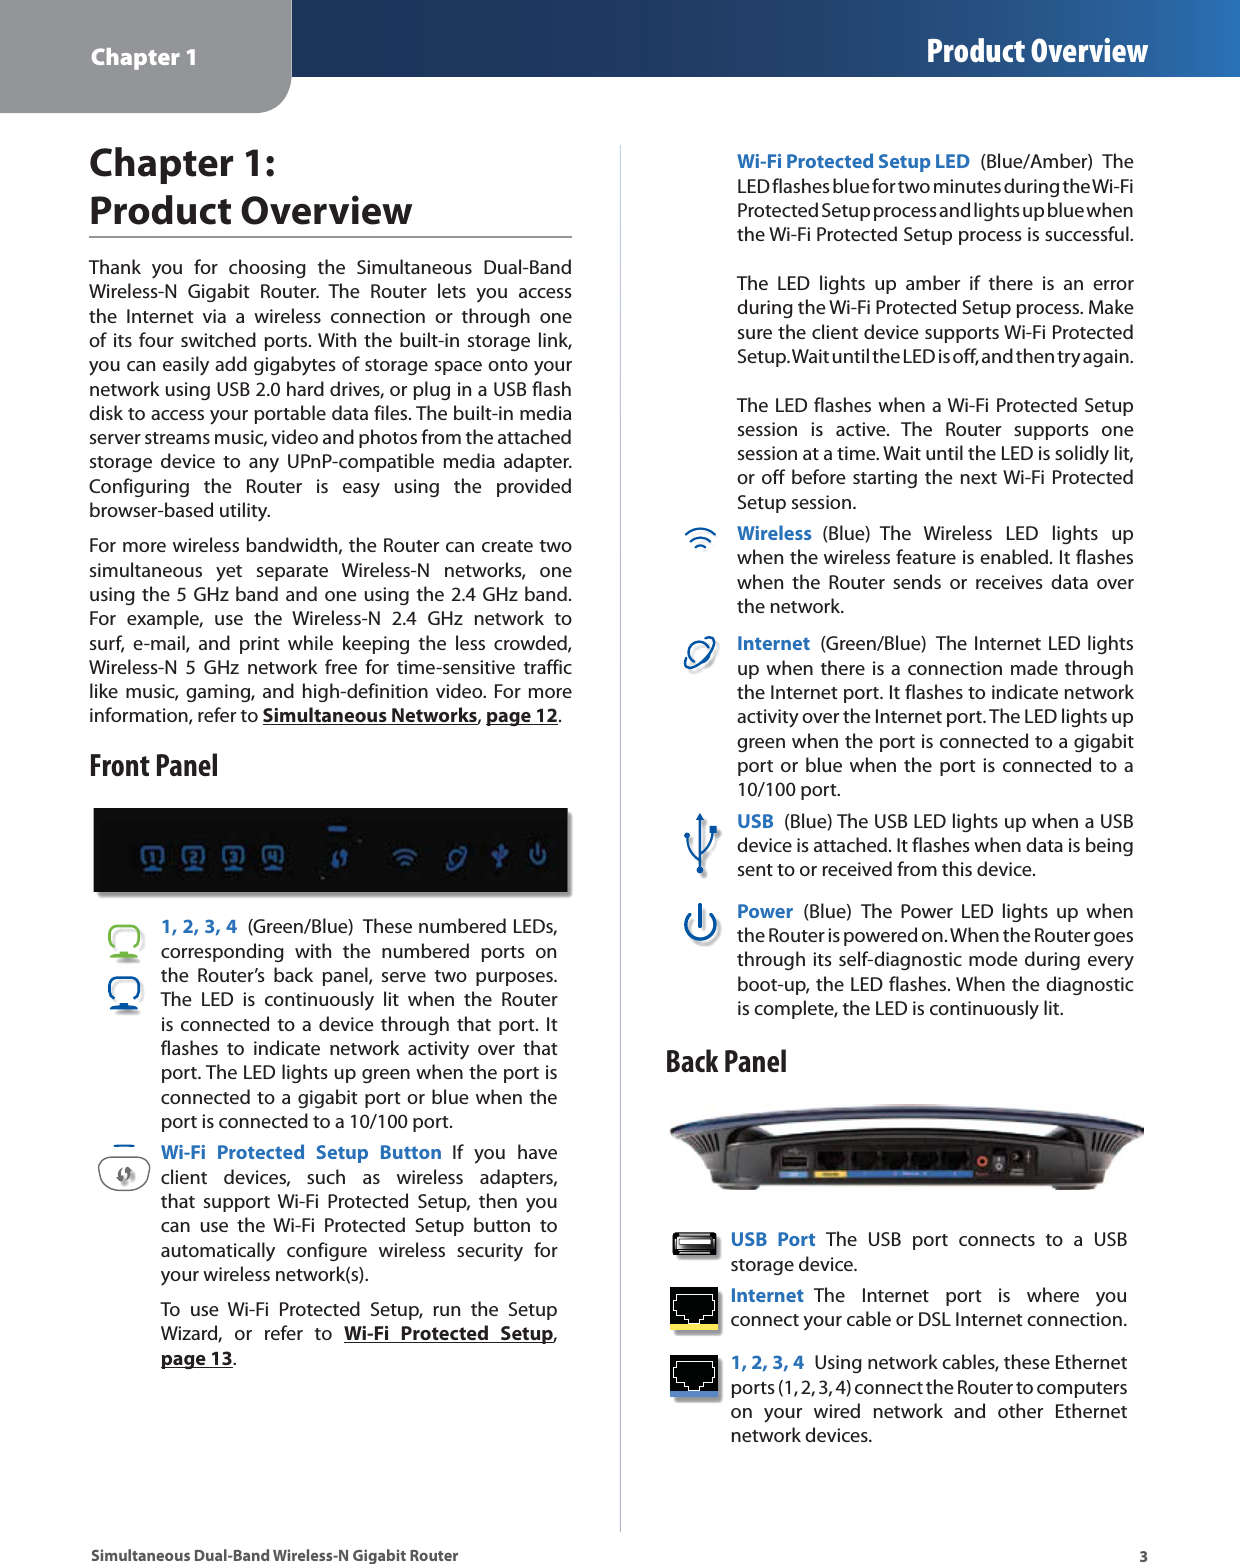 Chapter 1 Product Overview3Simultaneous Dual-Band Wireless-N Gigabit RouterChapter 1: Product OverviewThank you for choosing the Simultaneous Dual-Band Wireless-N Gigabit Router. The Router lets you access the Internet via a wireless connection or through one of its four switched ports. With the built-in storage link, you can easily add gigabytes of storage space onto your network using USB 2.0 hard drives, or plug in a USB flash disk to access your portable data files. The built-in media server streams music, video and photos from the attached storage device to any UPnP-compatible media adapter. Configuring the Router is easy using the provided browser-based utility.For more wireless bandwidth, the Router can create two simultaneous yet separate Wireless-N networks, one using the 5 GHz band and one using the 2.4 GHz band. For example, use the Wireless-N 2.4 GHz network to surf, e-mail, and print while keeping the less crowded, Wireless-N 5 GHz network free for time-sensitive traffic like music, gaming, and high-definition video. For more information, refer to Simultaneous Networks, page 12.Front Panel1, 2, 3, 4  (Green/Blue)  These numbered LEDs, corresponding with the numbered ports on the Router’s back panel, serve two purposes. The LED is continuously lit when the Router is connected to a device through that port. It flashes to indicate network activity over that port. The LED lights up green when the port is connected to a gigabit port or blue when the port is connected to a 10/100 port. Wi-Fi Protected Setup Button If you have client devices, such as wireless adapters, that support Wi-Fi Protected Setup, then you can use the Wi-Fi Protected Setup button to automatically configure wireless security for your wireless network(s).To use Wi-Fi Protected Setup, run the Setup Wizard, or refer to Wi-Fi Protected Setup, page 13.Wi-Fi Protected Setup LED  (Blue/Amber) The LED flashes blue for two minutes during the Wi-Fi Protected Setup process and lights up blue when the Wi-Fi Protected Setup process is successful.    The LED lights up amber if there is an error during the Wi-Fi Protected Setup process. Make sure the client device supports Wi-Fi Protected Setup. Wait until the LED is off, and then try again.   The LED flashes when a Wi-Fi Protected Setup session is active. The Router supports one session at a time. Wait until the LED is solidly lit, or off before starting the next Wi-Fi Protected Setup session.Wireless (Blue) The Wireless LED lights up when the wireless feature is enabled. It flashes when the Router sends or receives data over the network.Internet  (Green/Blue) The Internet LED lights up when there is a connection made through the Internet port. It flashes to indicate network activity over the Internet port. The LED lights up green when the port is connected to a gigabit port or blue when the port is connected to a 10/100 port. USB  (Blue) The USB LED lights up when a USB device is attached. It flashes when data is being sent to or received from this device.Power  (Blue) The Power LED lights up when the Router is powered on. When the Router goes through its self-diagnostic mode during every boot-up, the LED flashes. When the diagnostic is complete, the LED is continuously lit.Back PanelUSB Port The USB port connects to a USB storage device. Internet  The Internet port is where you connect your cable or DSL Internet connection. 1, 2, 3, 4  Using network cables, these Ethernet ports (1, 2, 3, 4) connect the Router to computers on your wired network and other Ethernet network devices. 